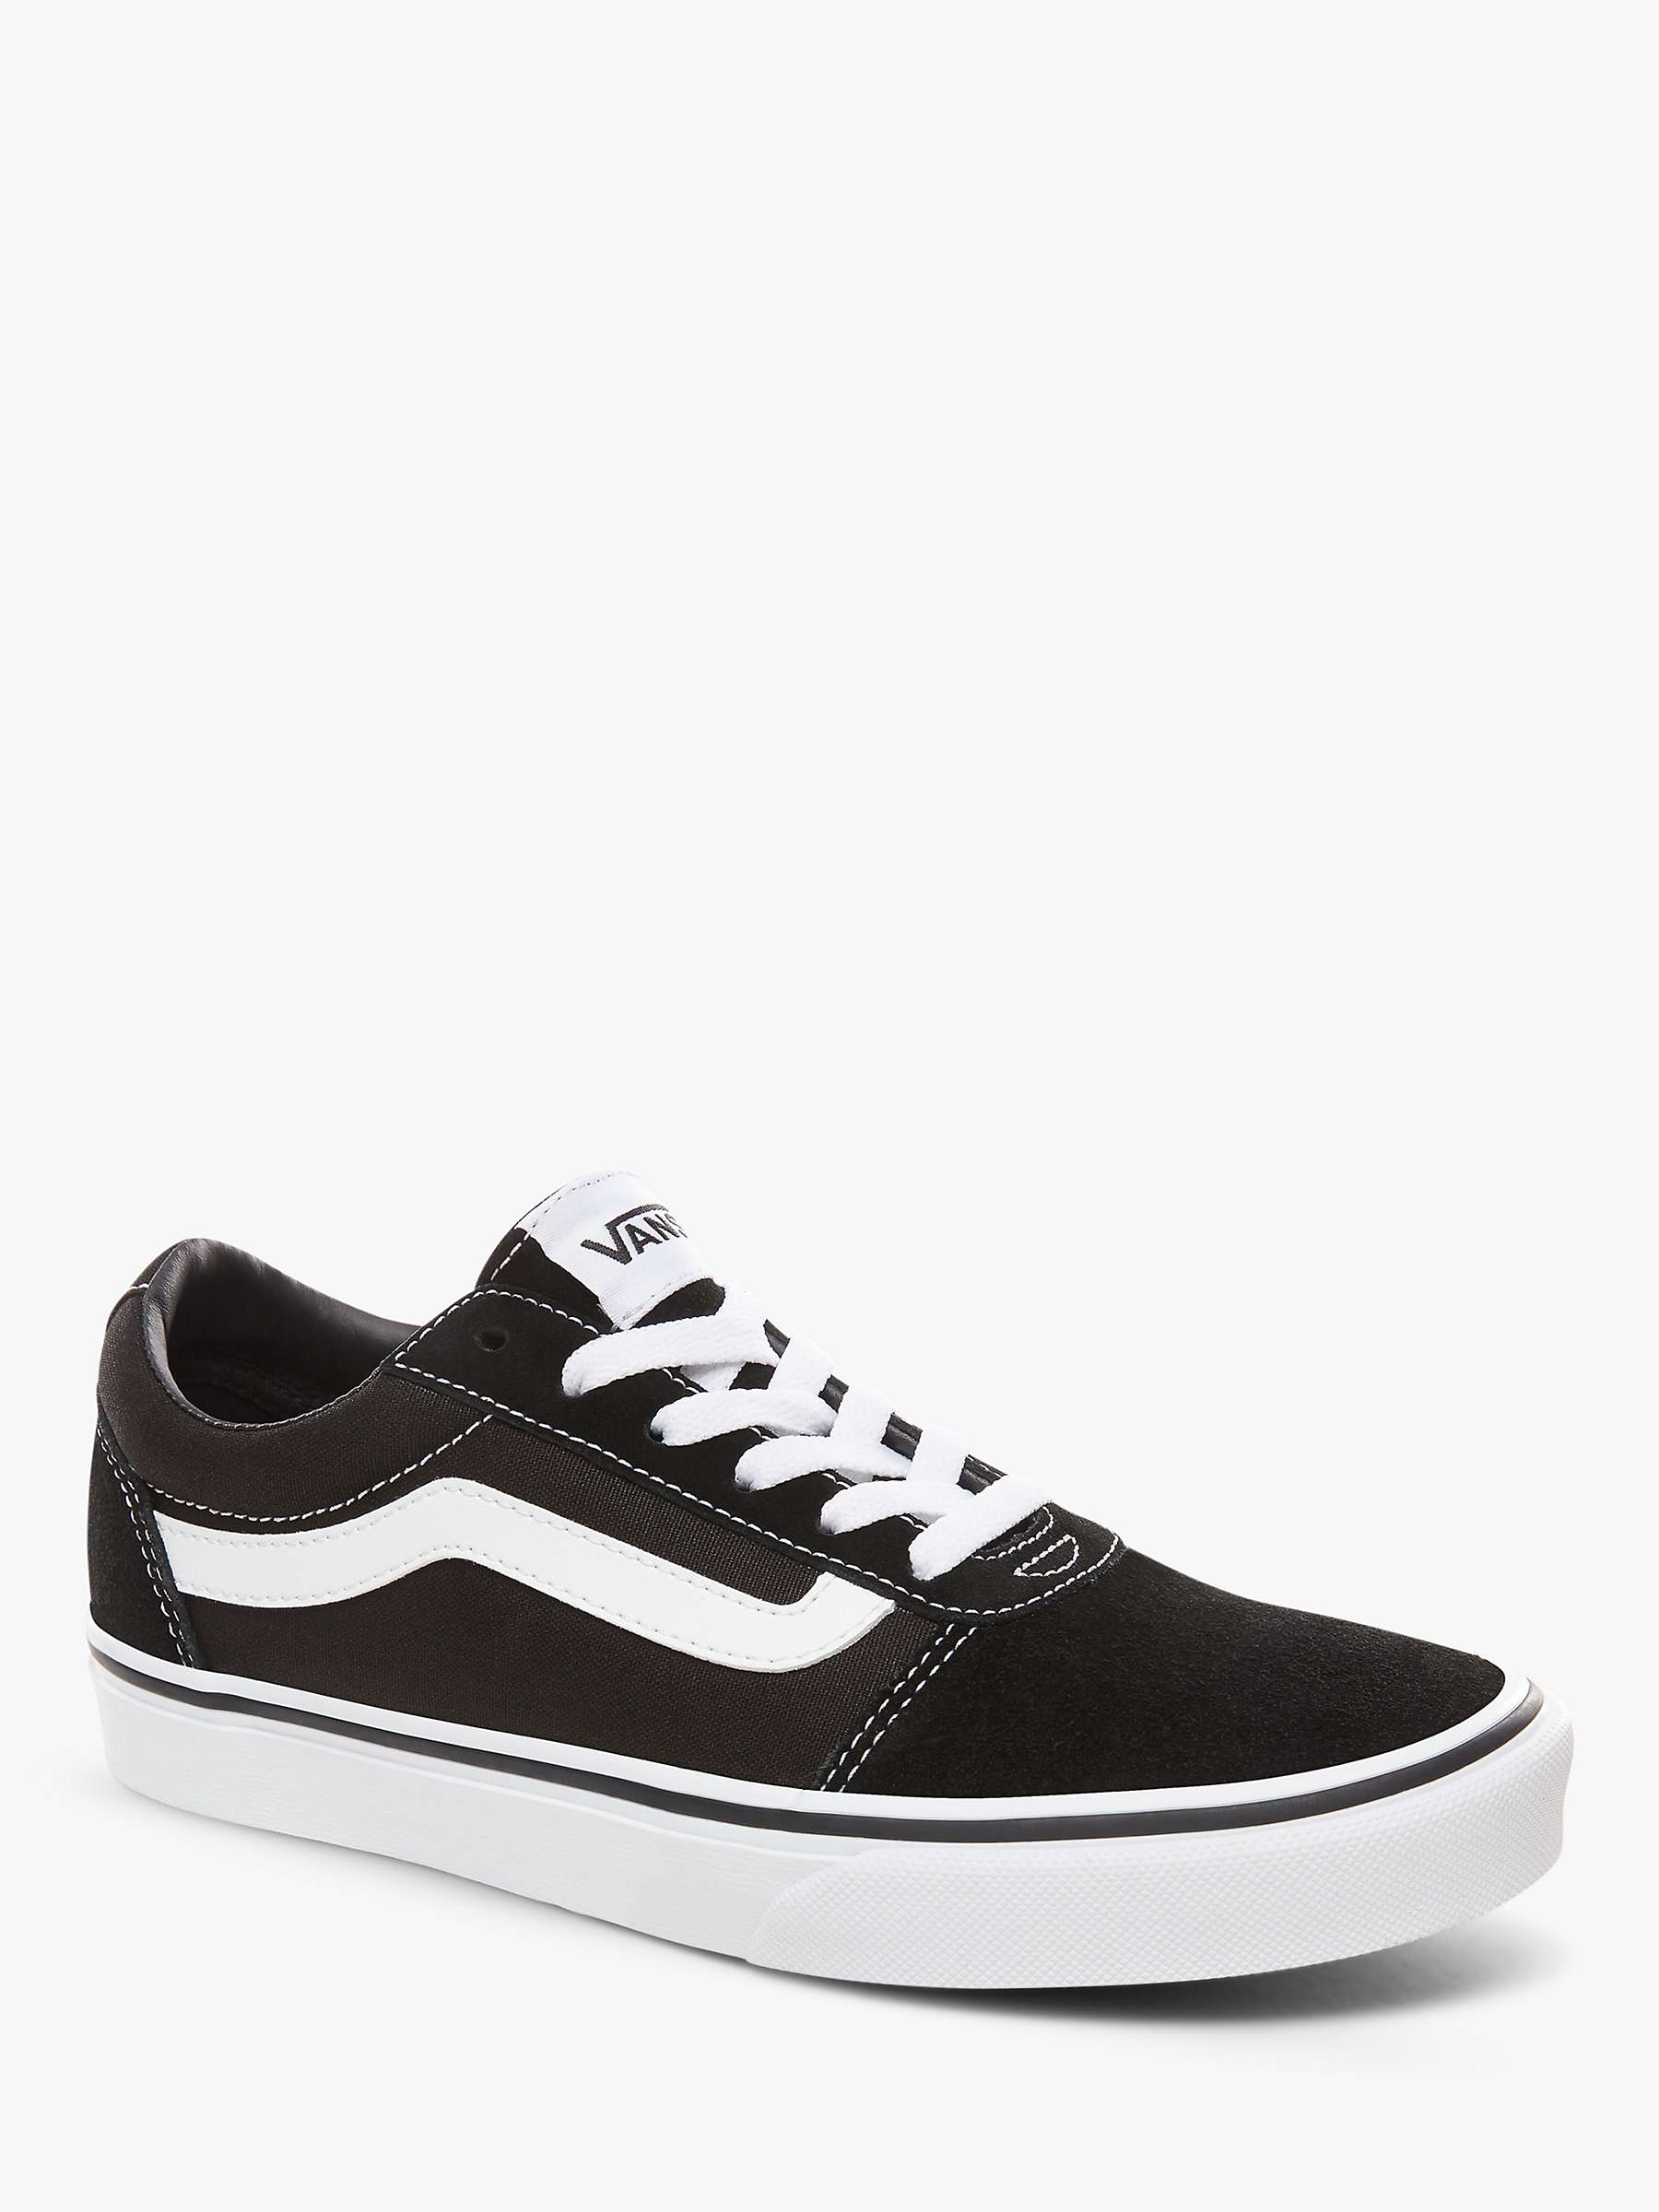 Buy Vans Ward Lace Up Trainers Online at johnlewis.com